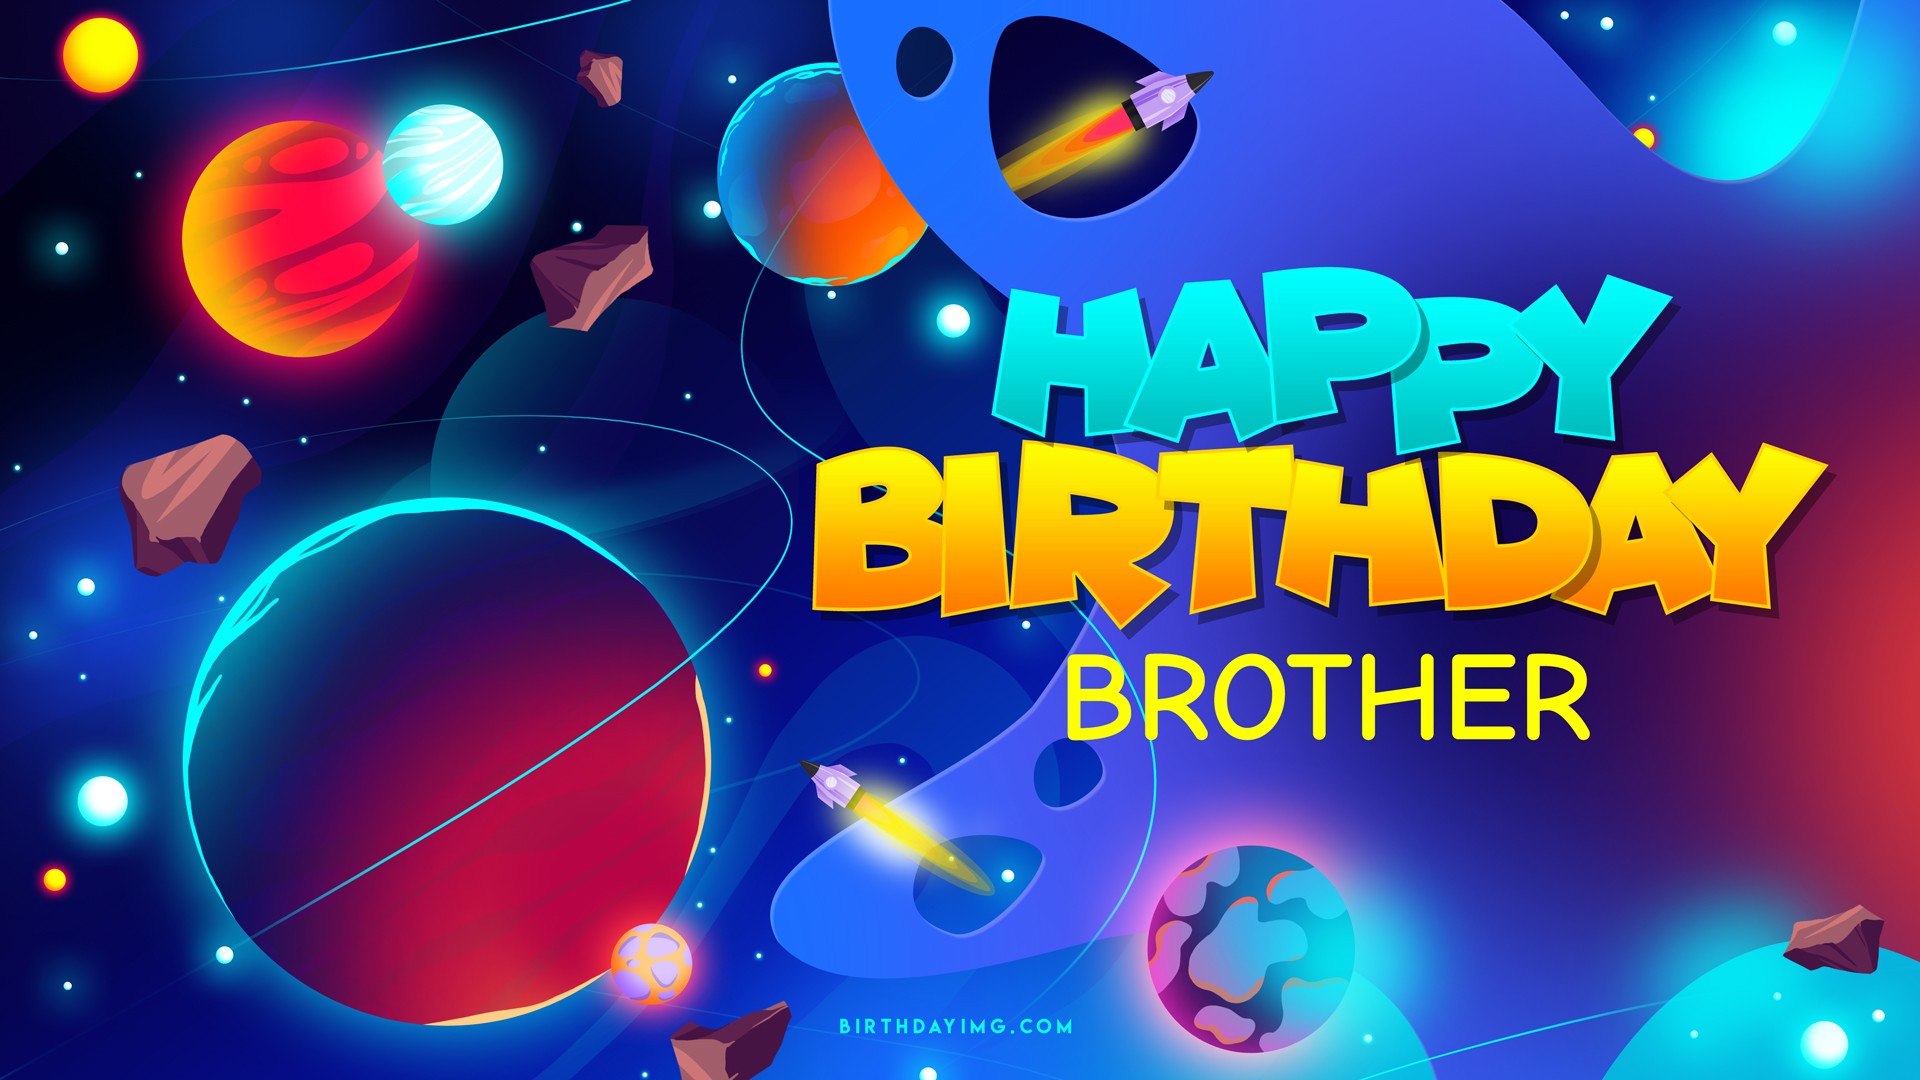 Free for brother happy birthday wallpaper with space and planets